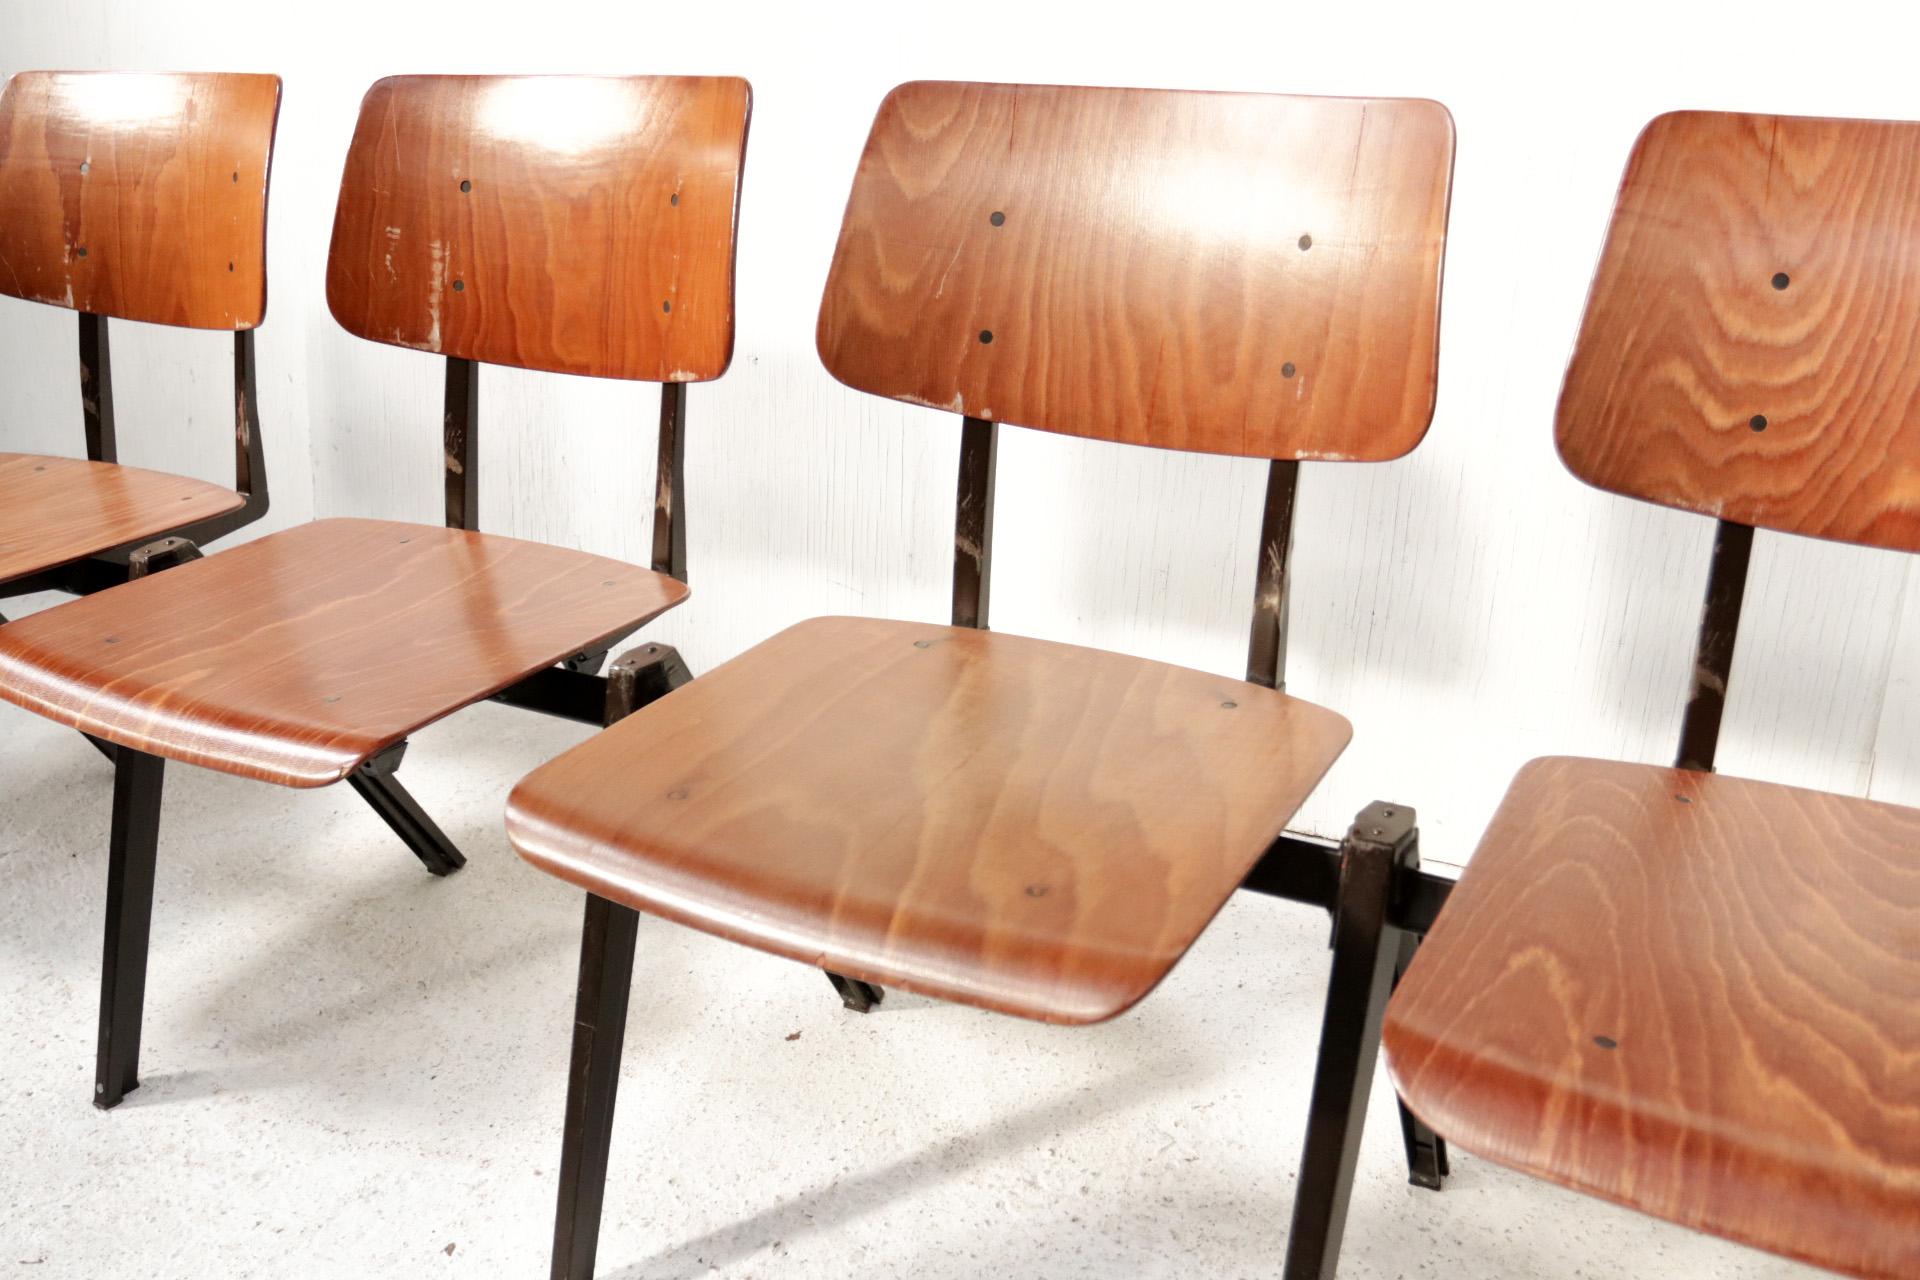 Large batch of Original S21 stackable and switchable school chairs made by Galvanitas from the 60s - 70s in the style of the designs of Friso Kramer, Wim Rietveld and Jean Prouvé.
We sell them in sets of 10 pieces.
What makes these seats very